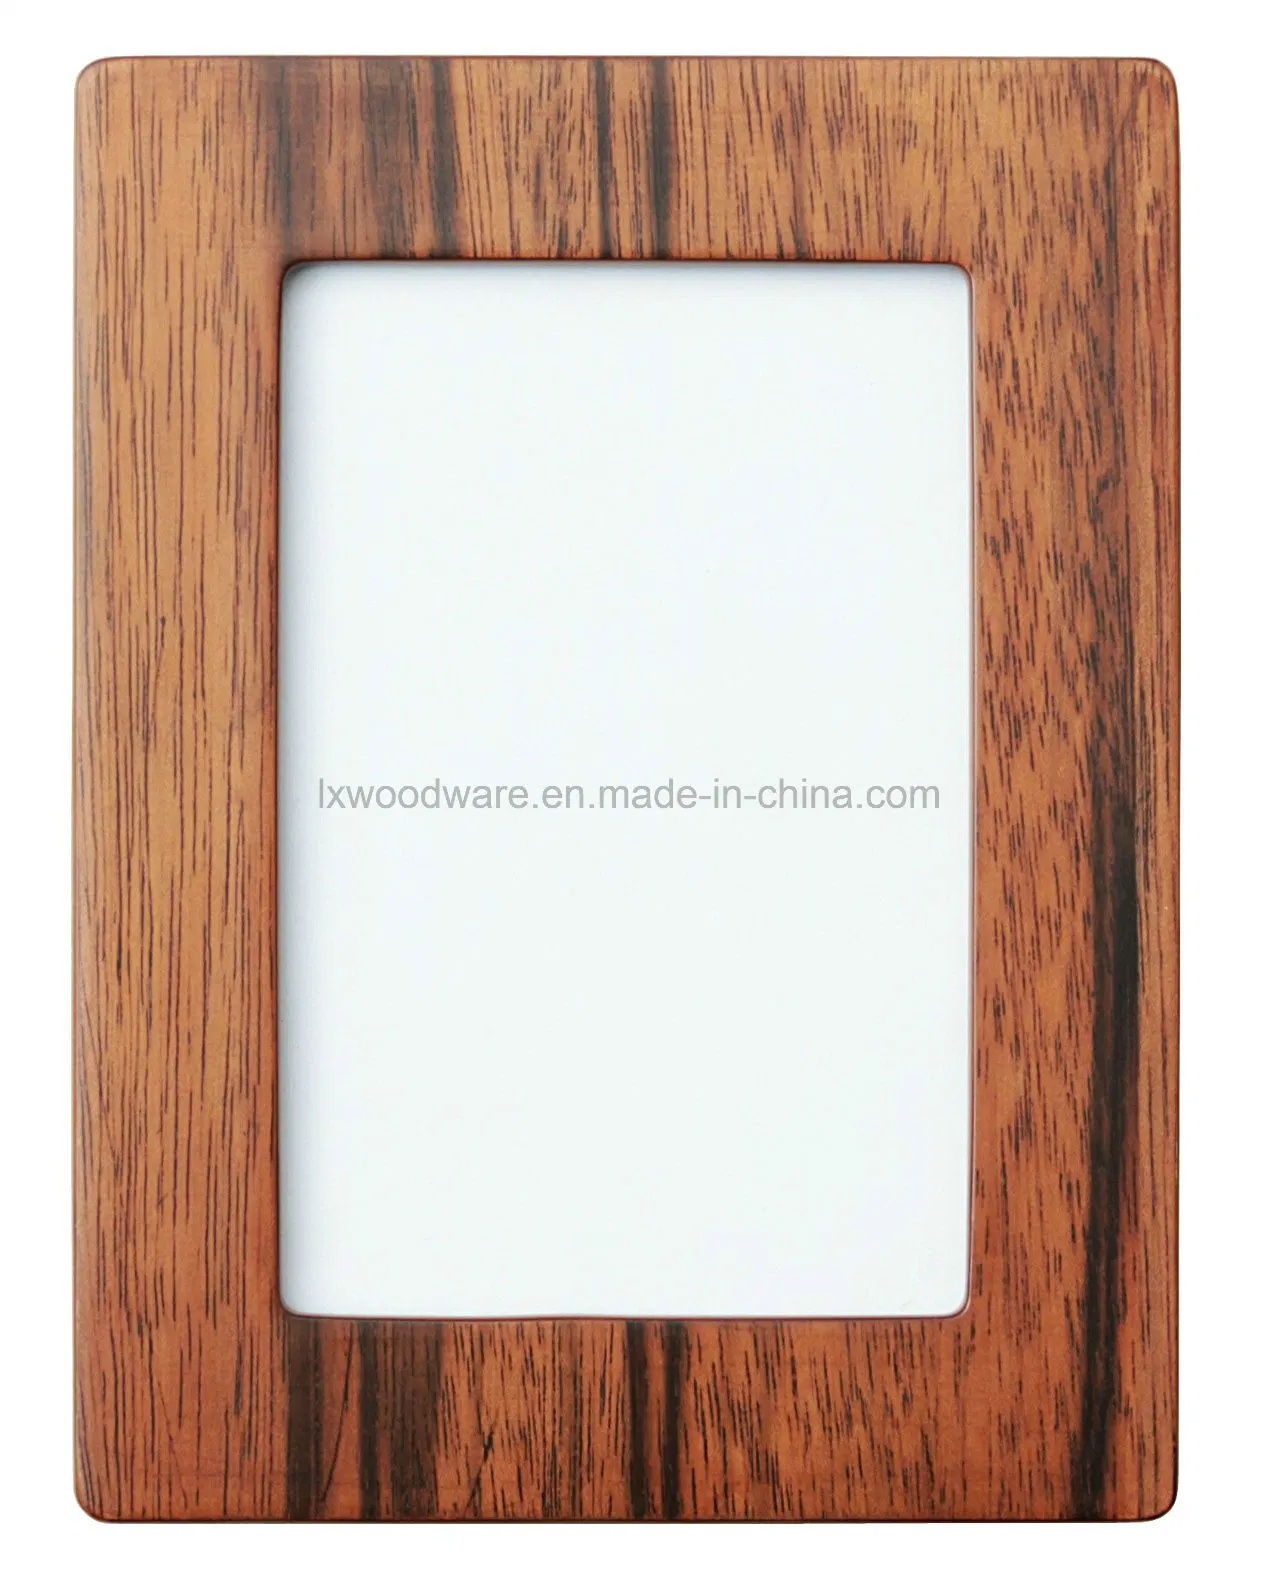 Walnut Semi-Glossy Wooden Art Craft Photo/Picture Frame with Glass Window